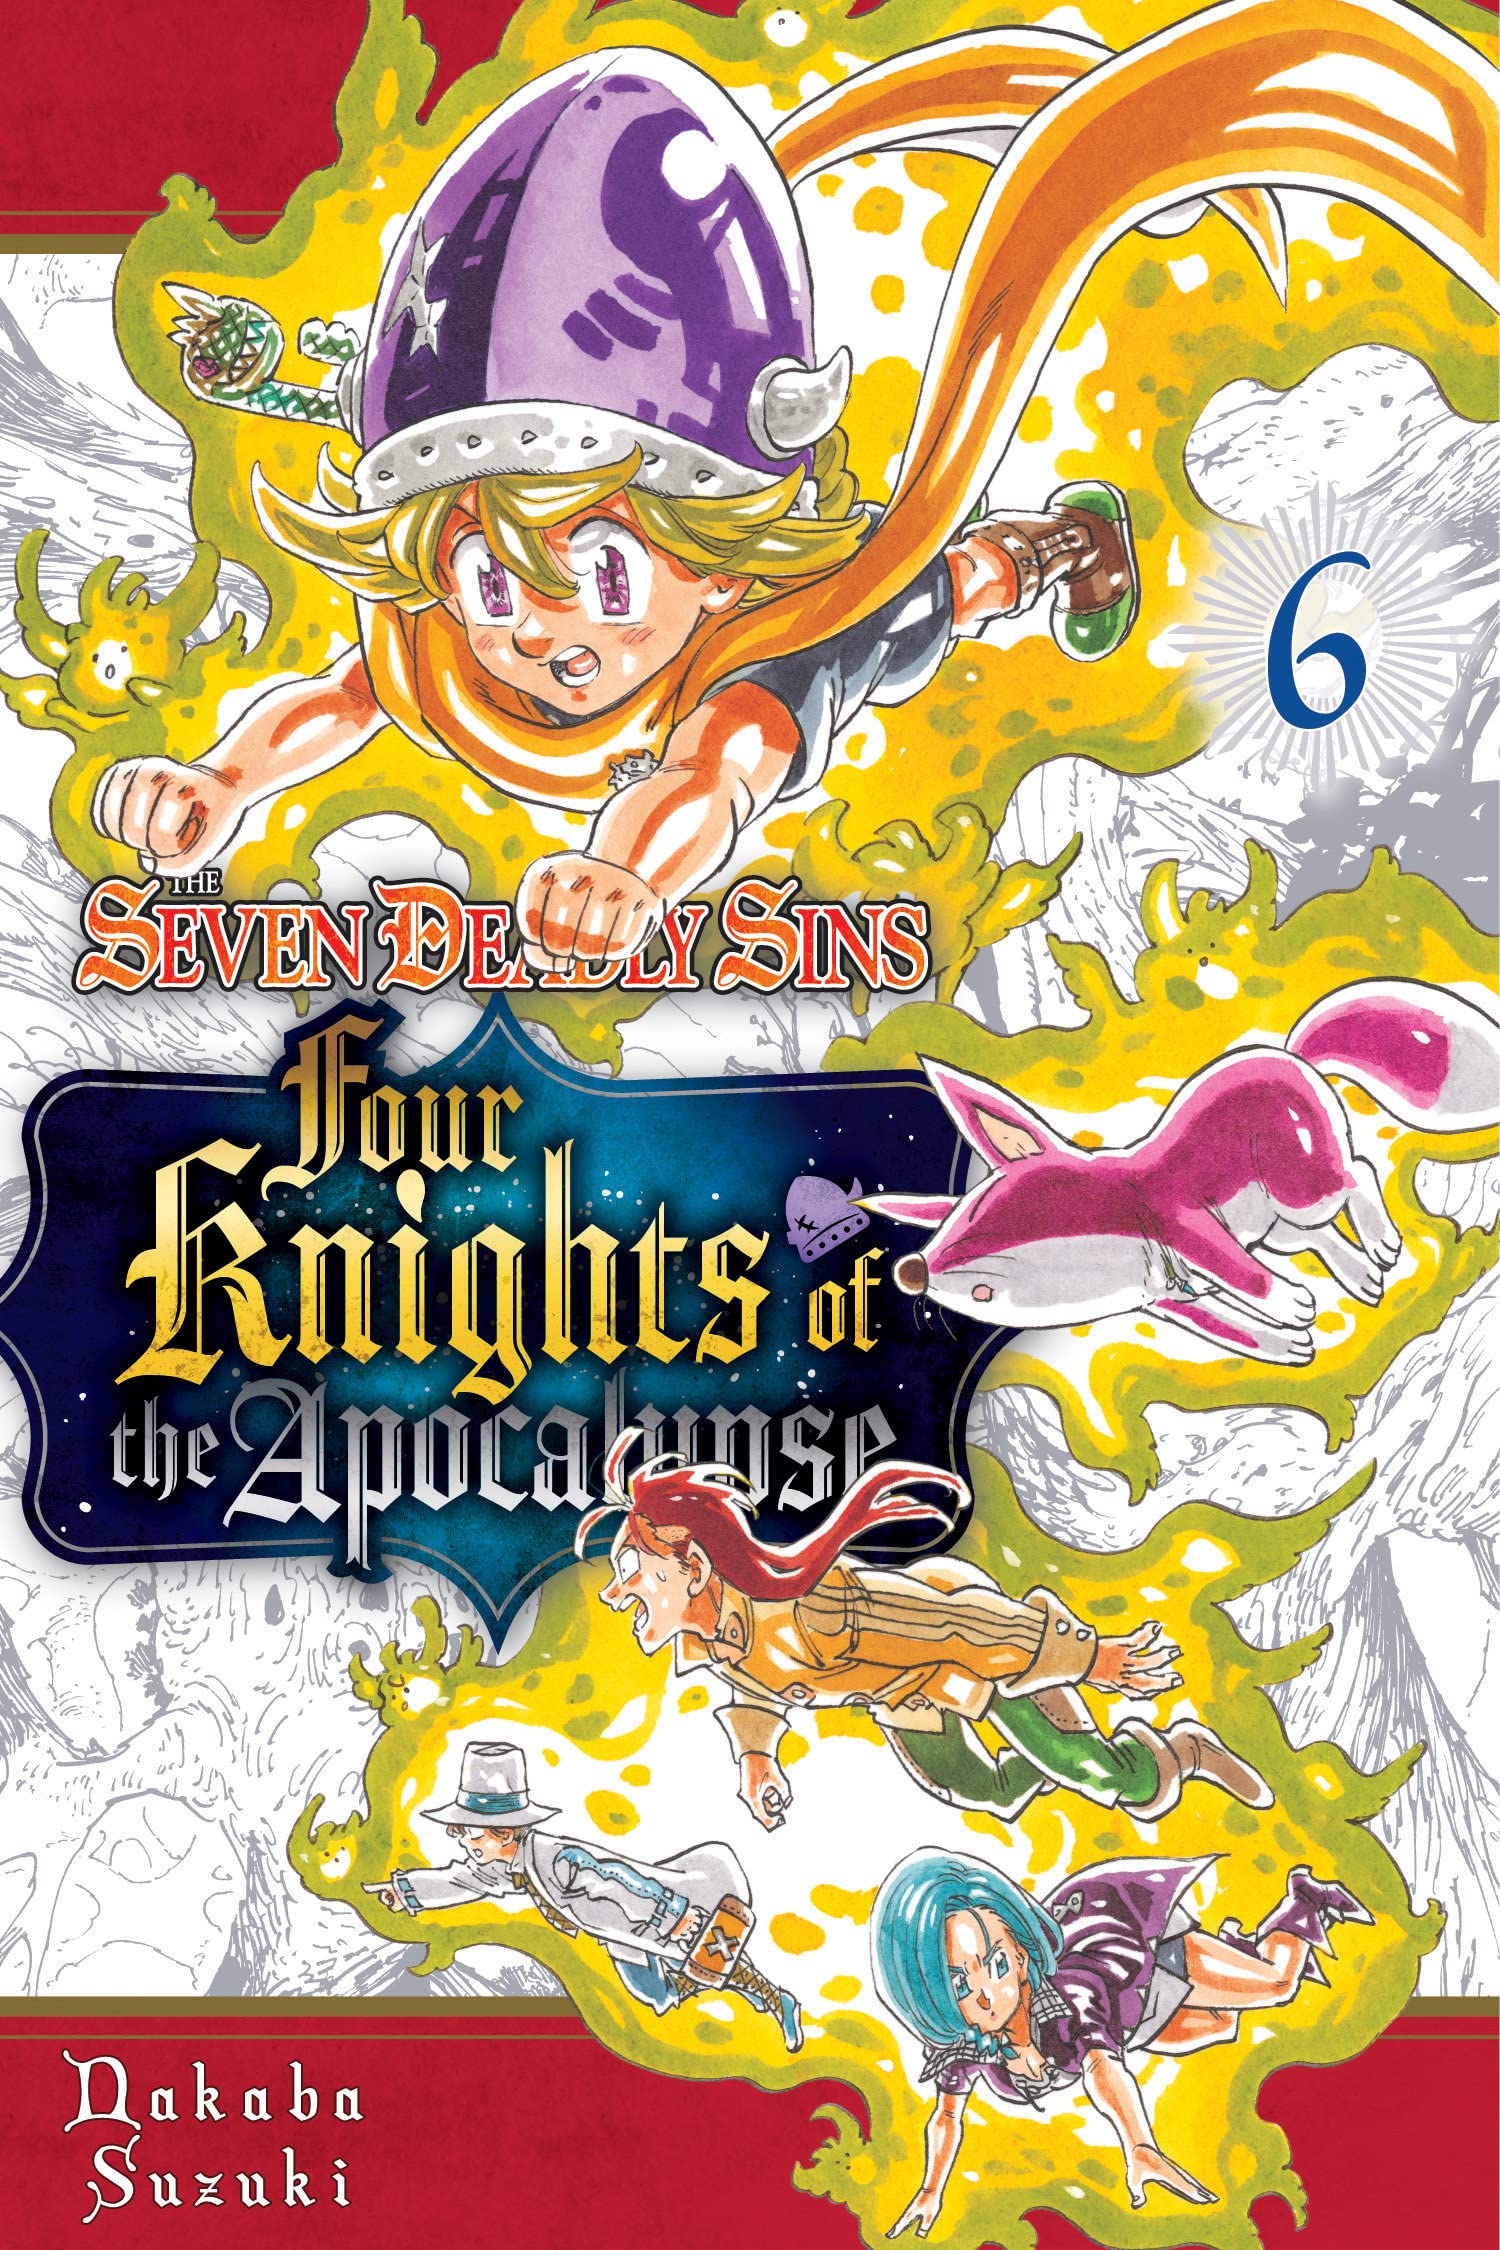 The Seven Deadly Sins: Four Knights of the Apocalypse Vol. 06